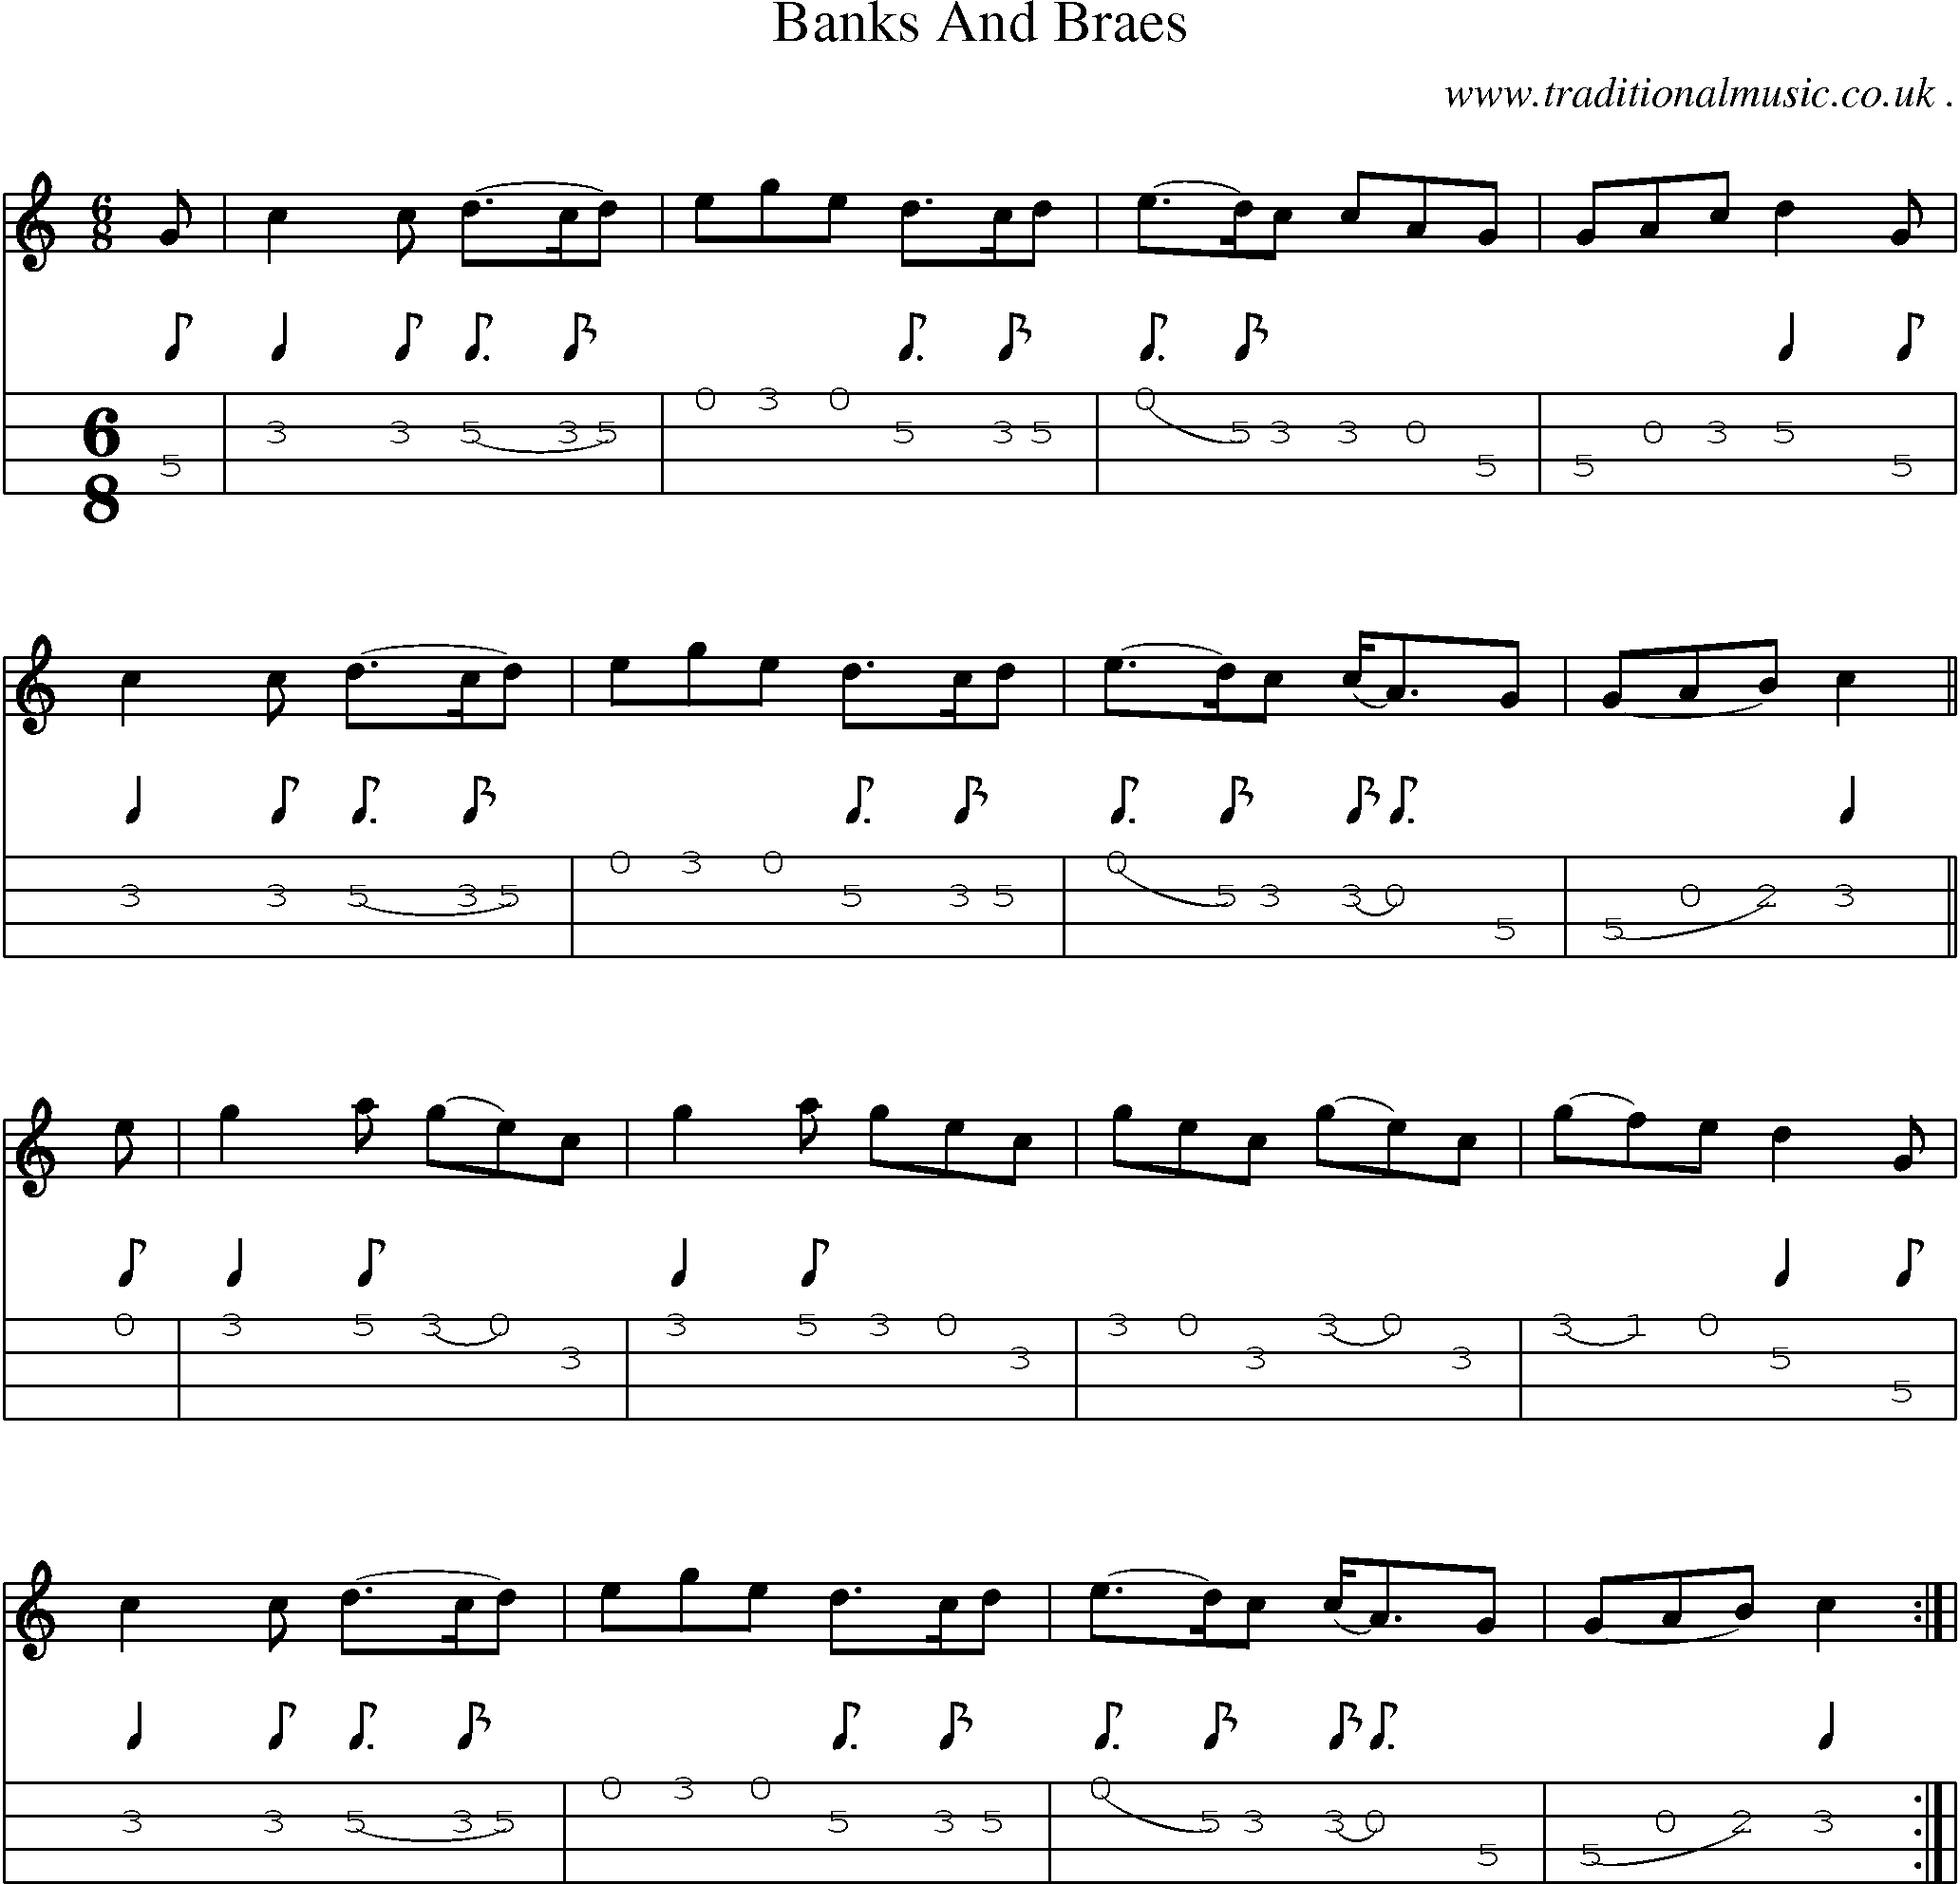 Sheet-Music and Mandolin Tabs for Banks And Braes